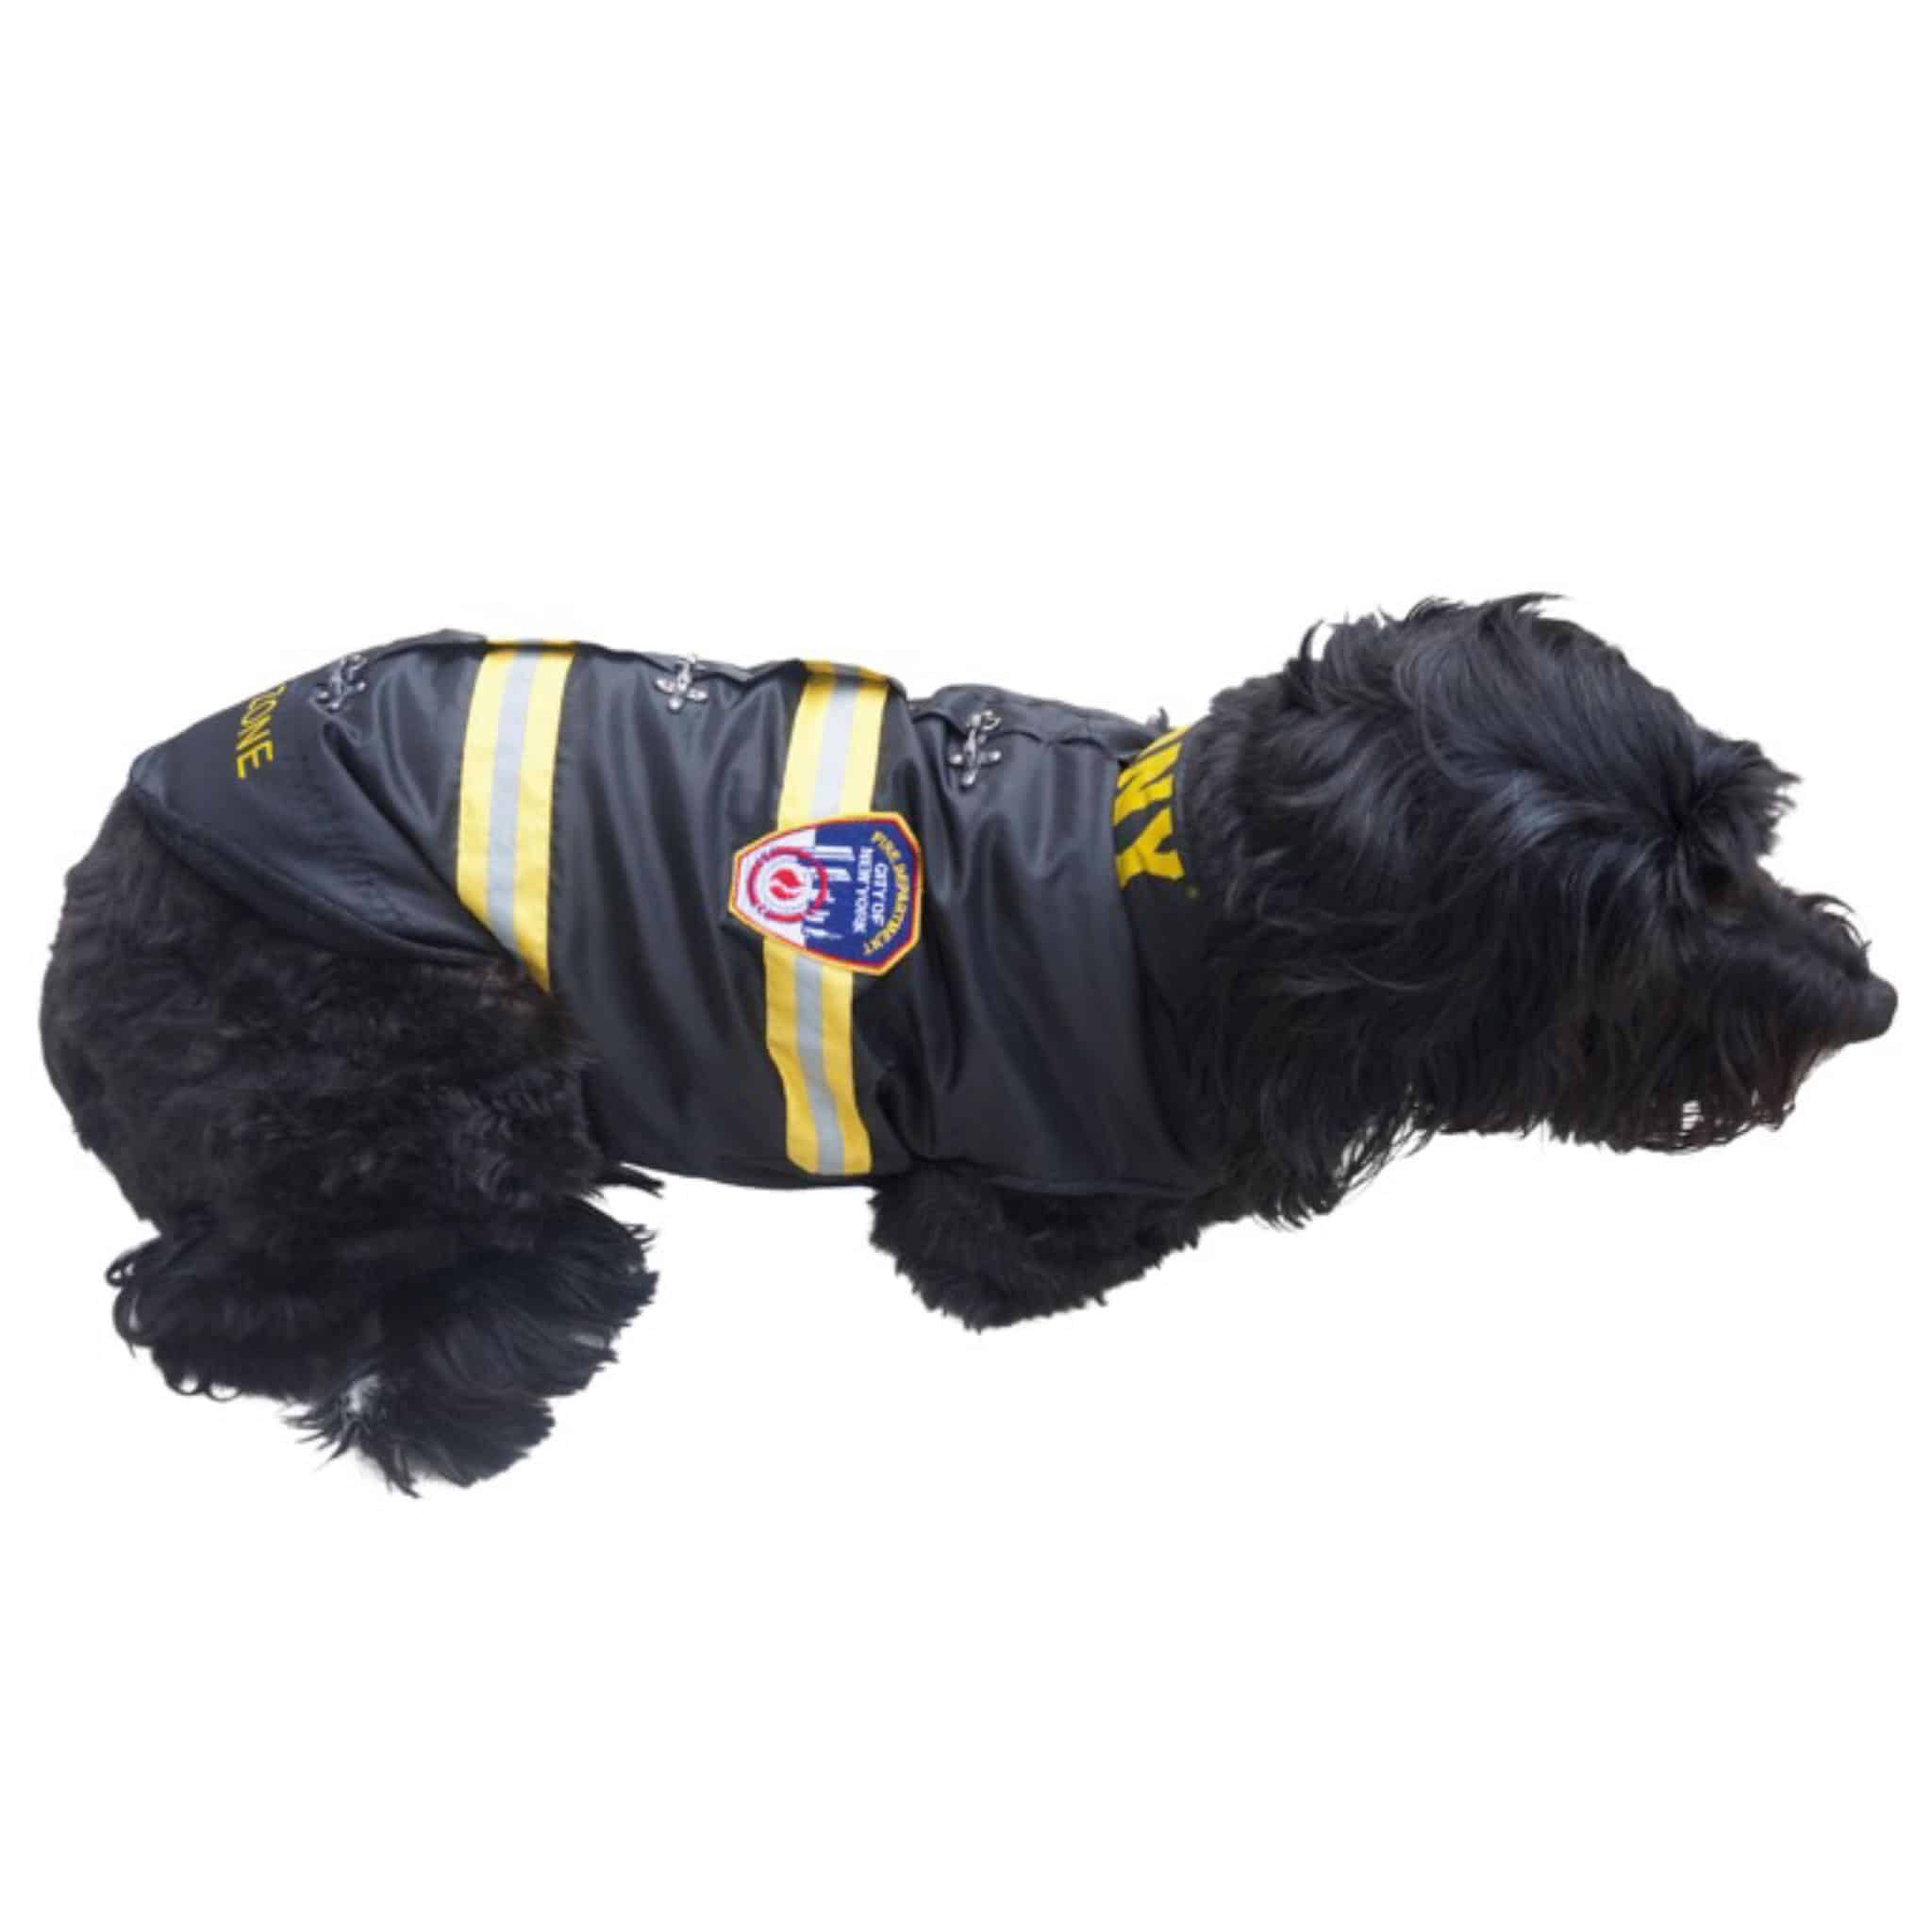 NHL Boston Bruins Pet Apparel Jersey Dog Outfit XS (BRAND NEW)